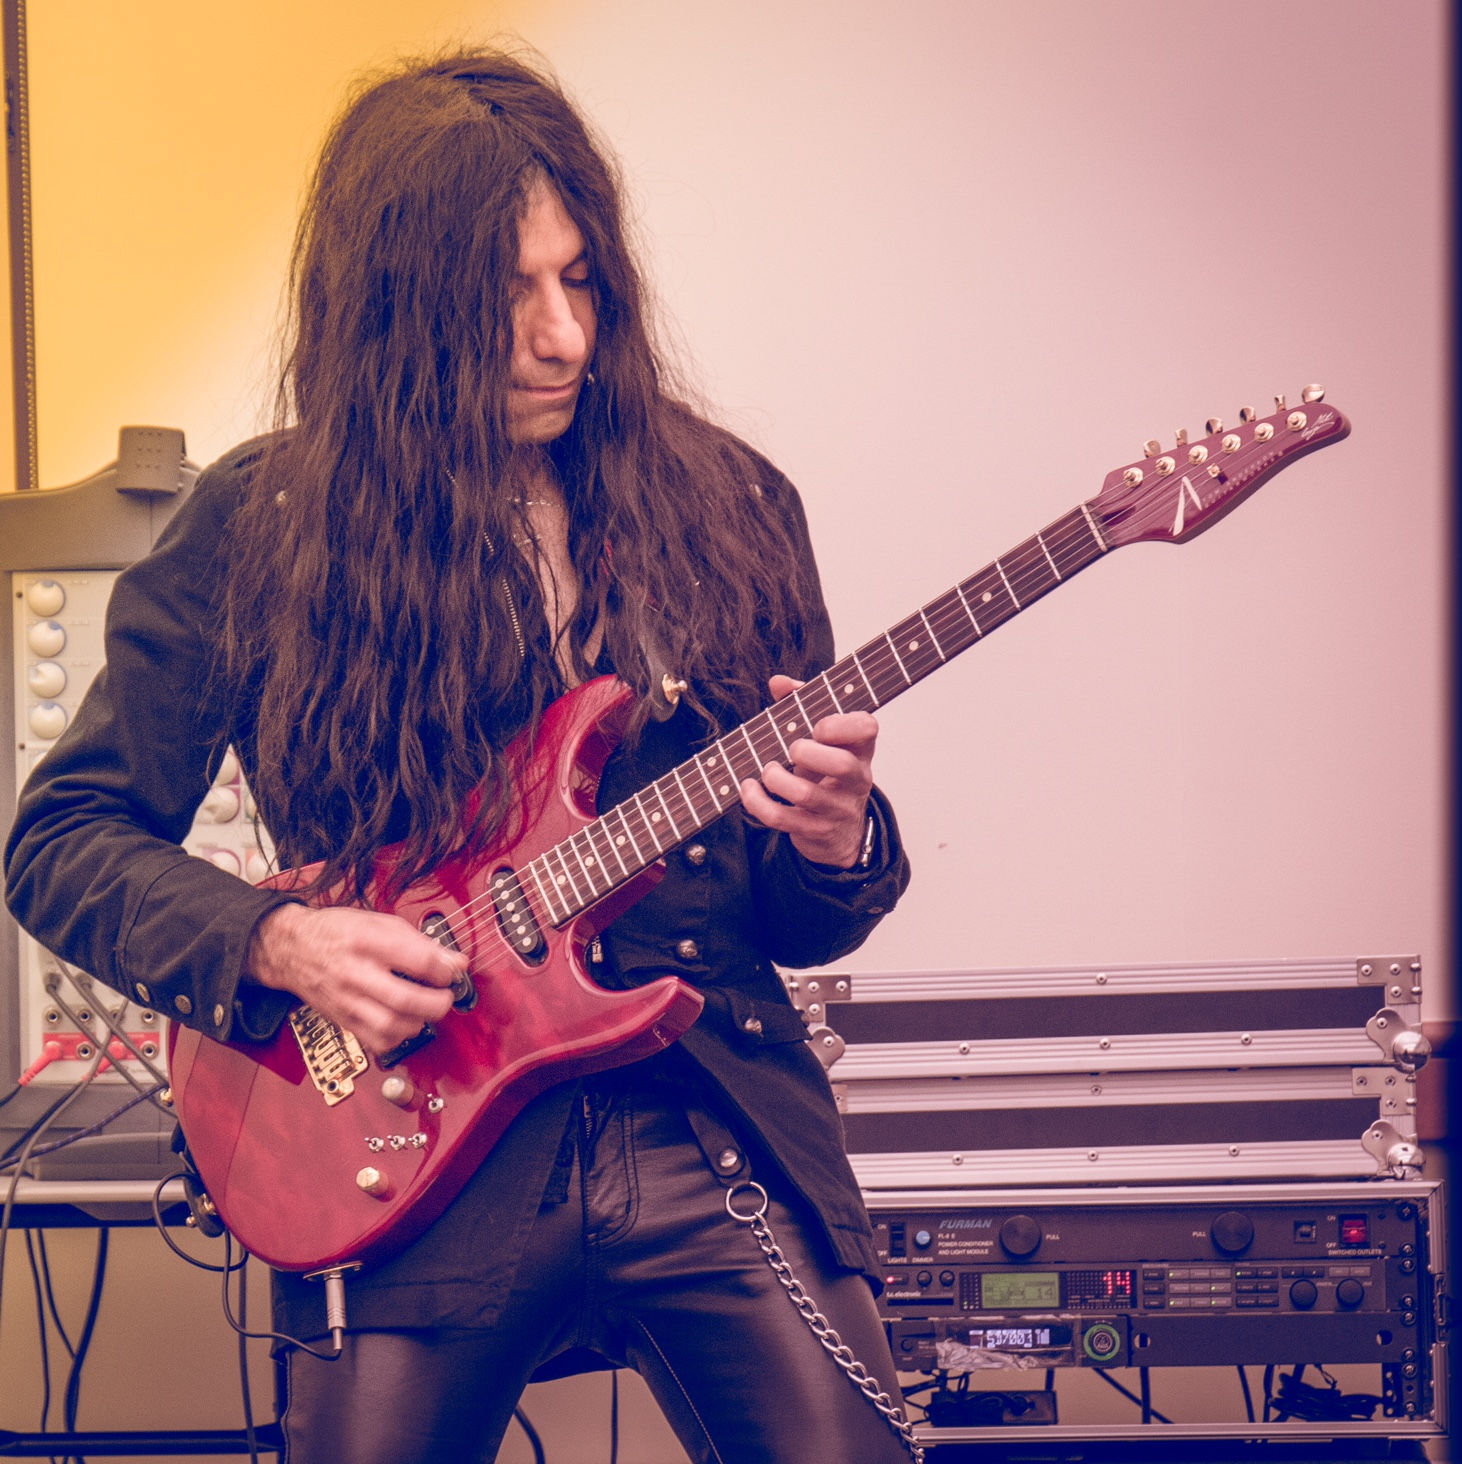 Mike Campese - First Night 2016, great shot.